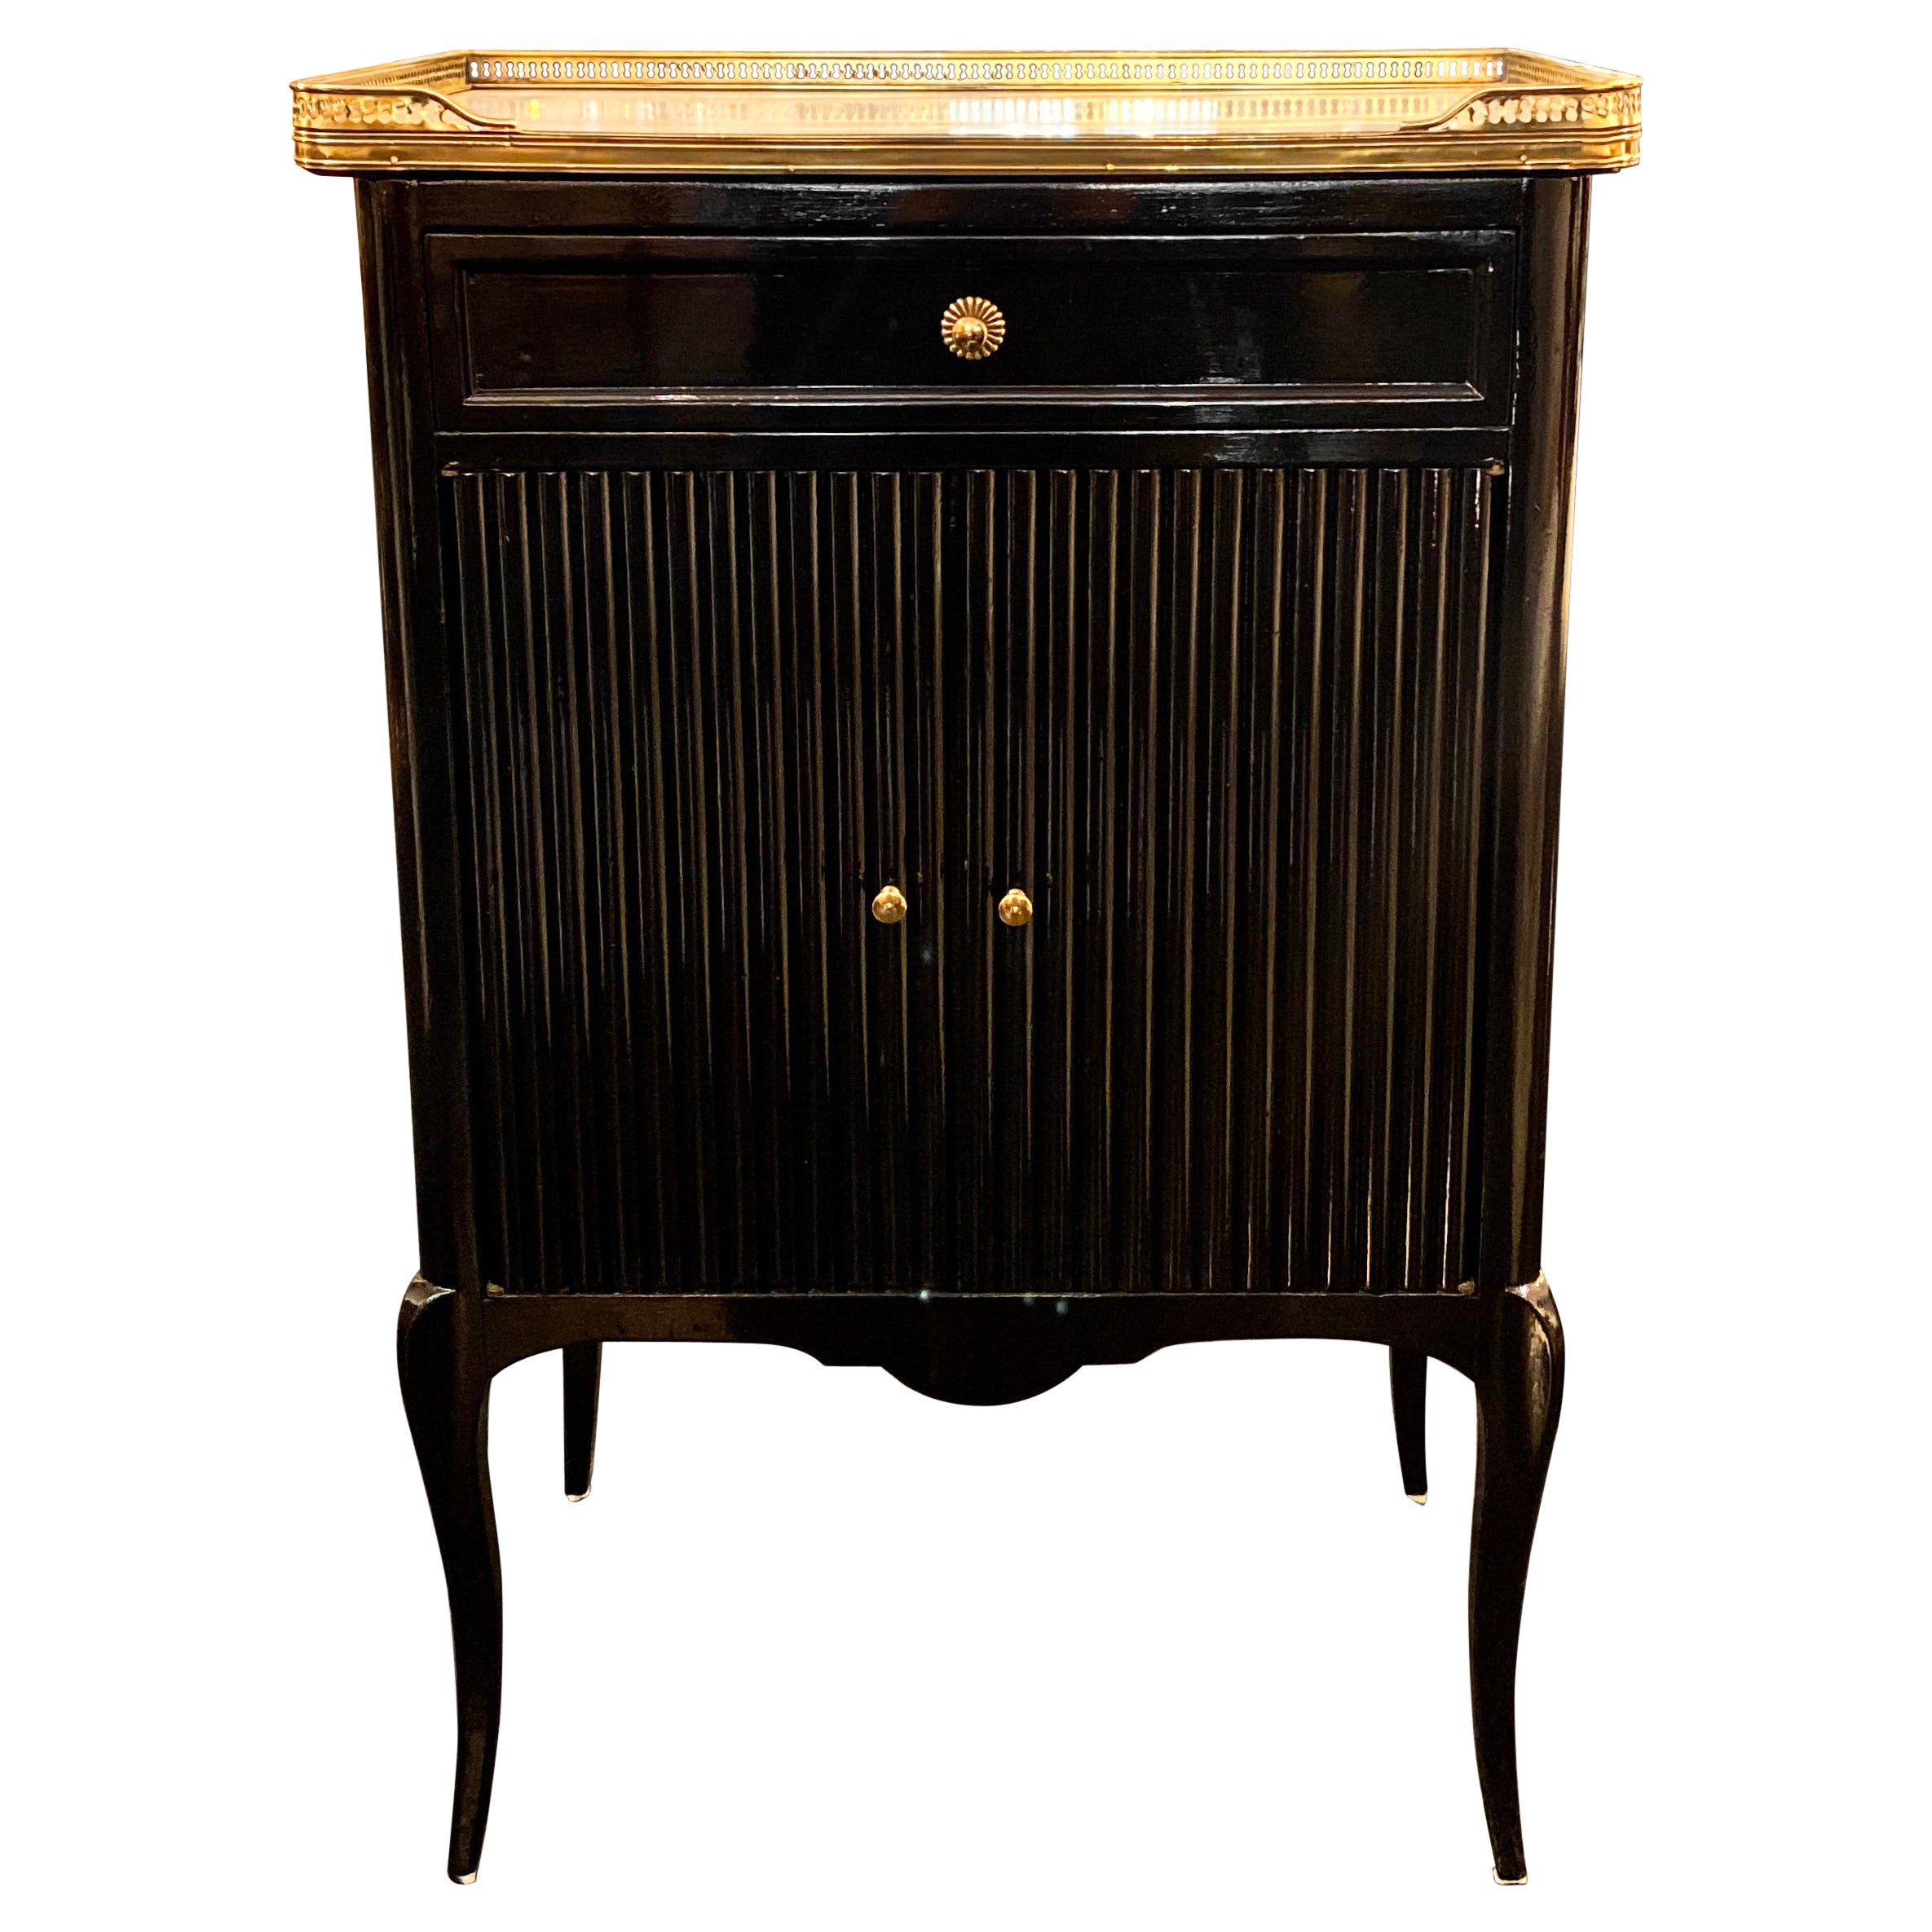 French Maison Jansen Style, Black-Lacquered Cabinet, Louis XVI Style, Marble Top